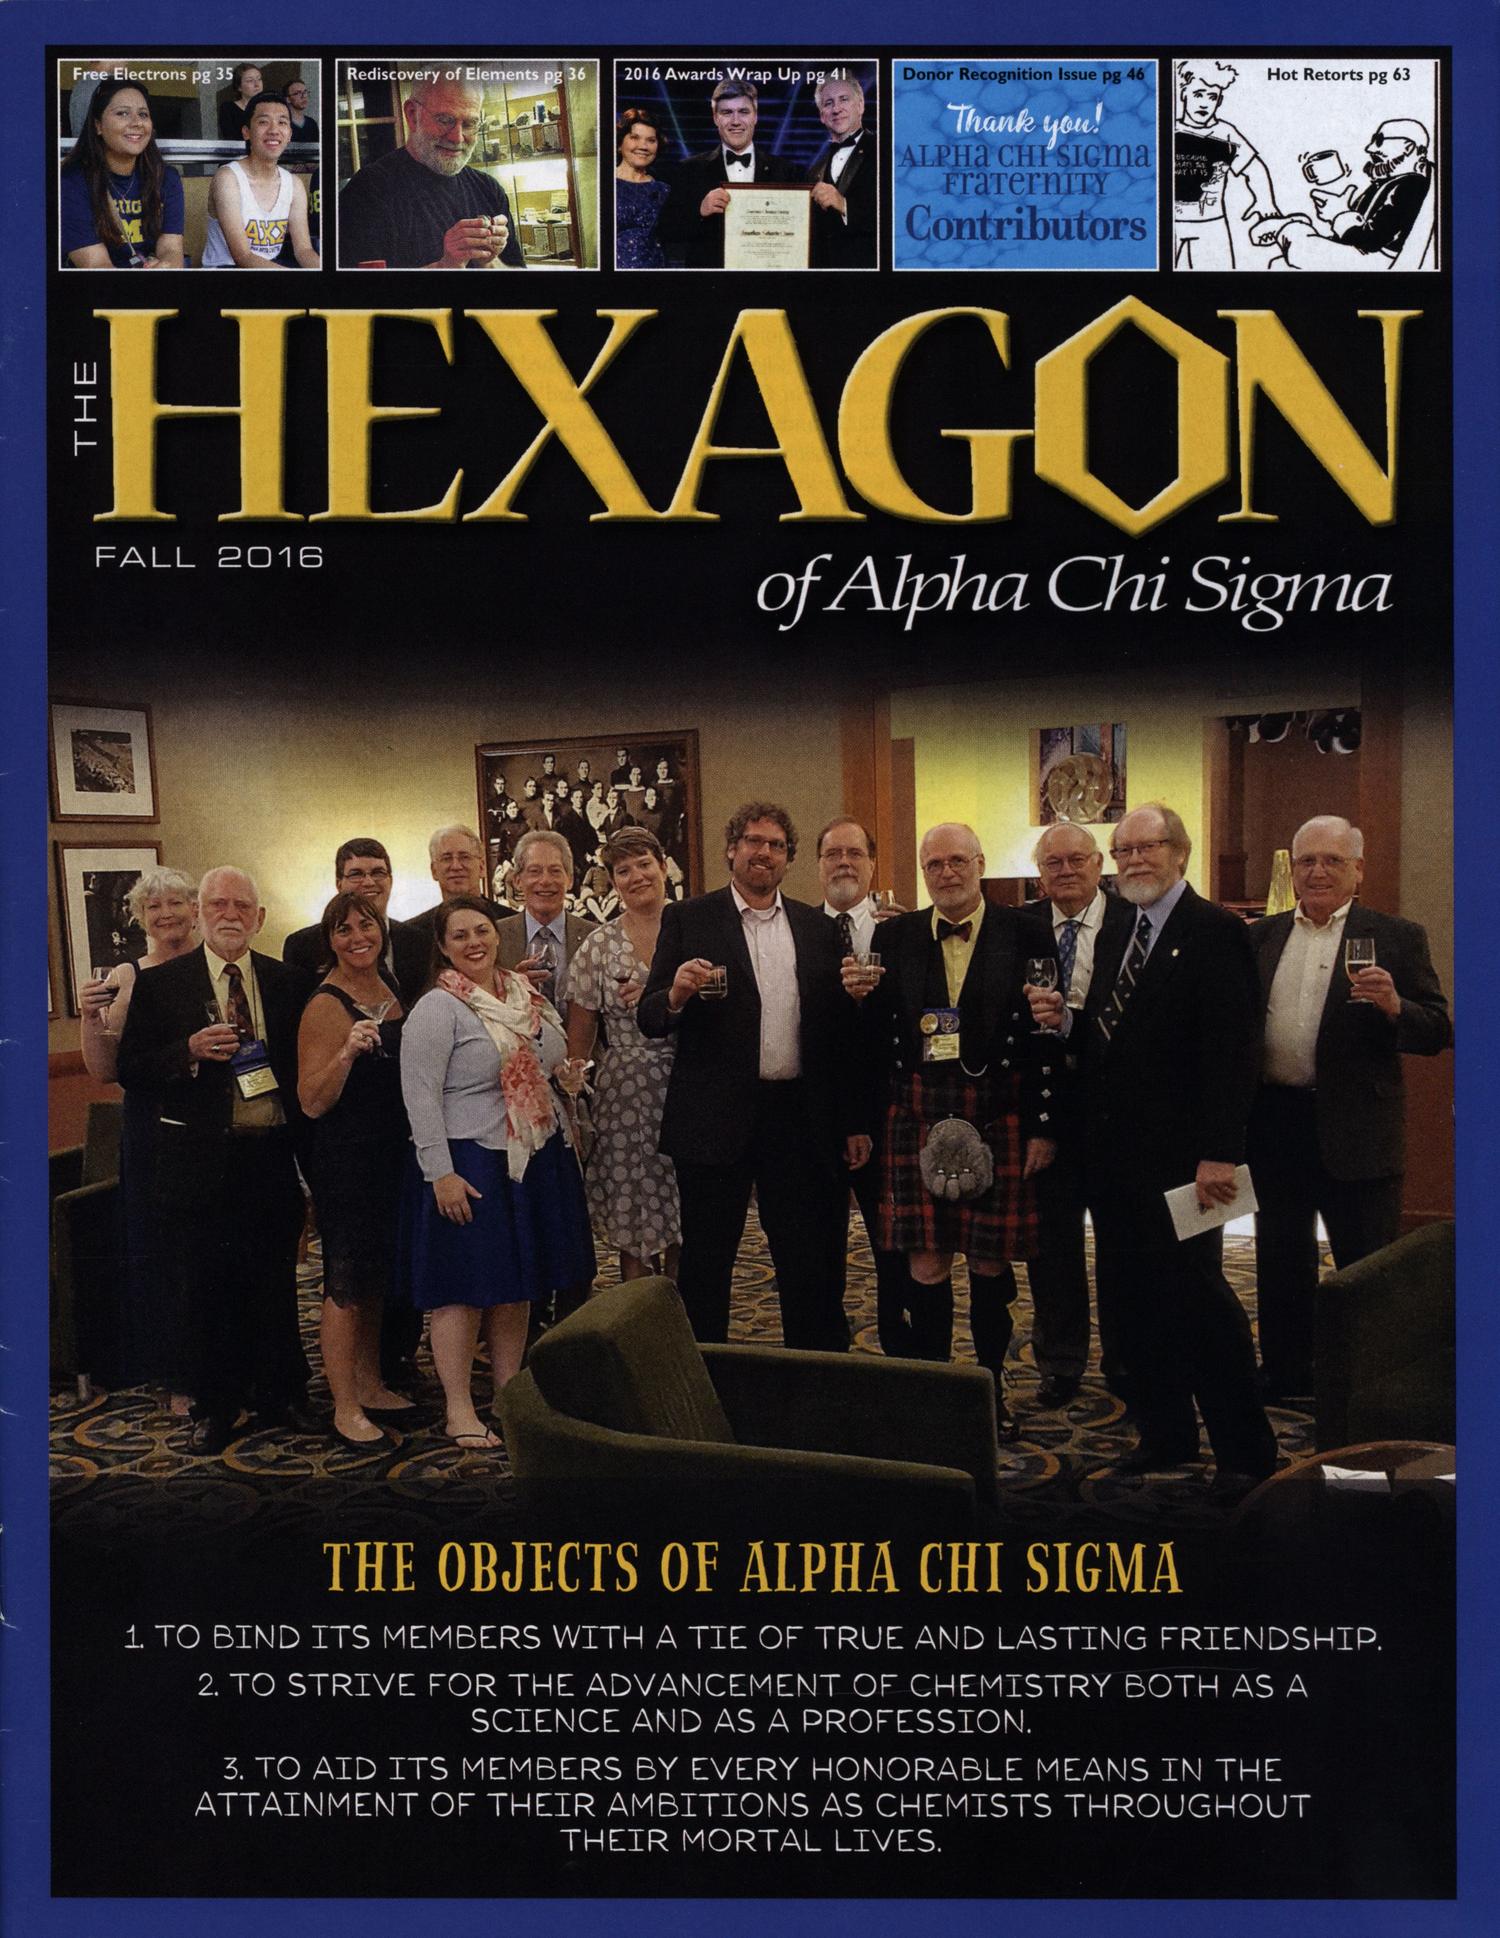 The Hexagon, Volume 107, Number 3, Fall 2016
                                                
                                                    Front Cover
                                                